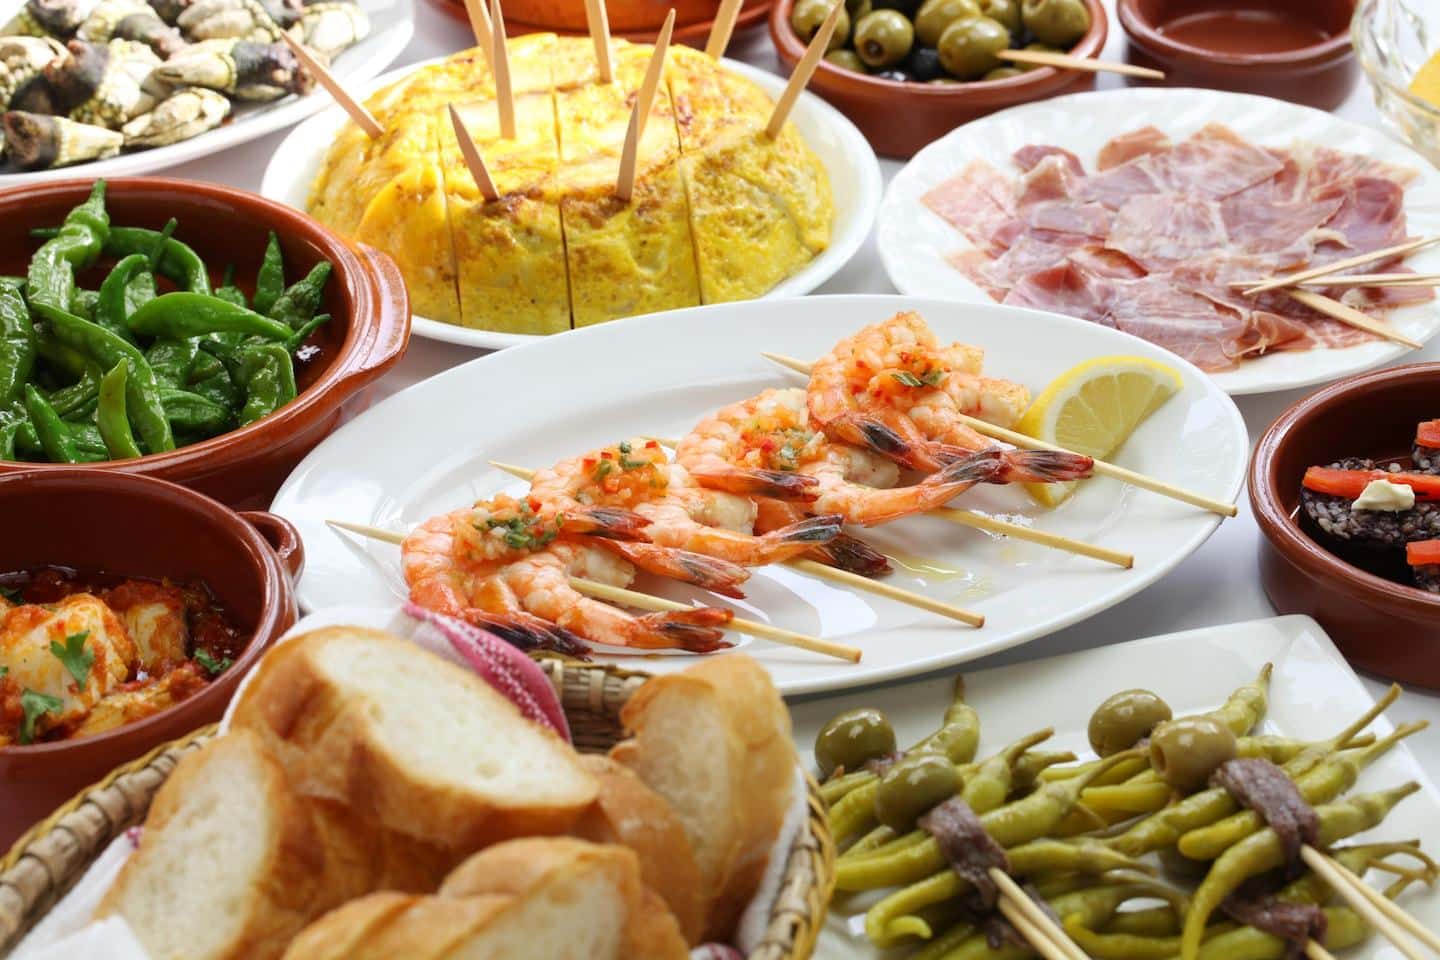 spread of different tapas dishes in spain